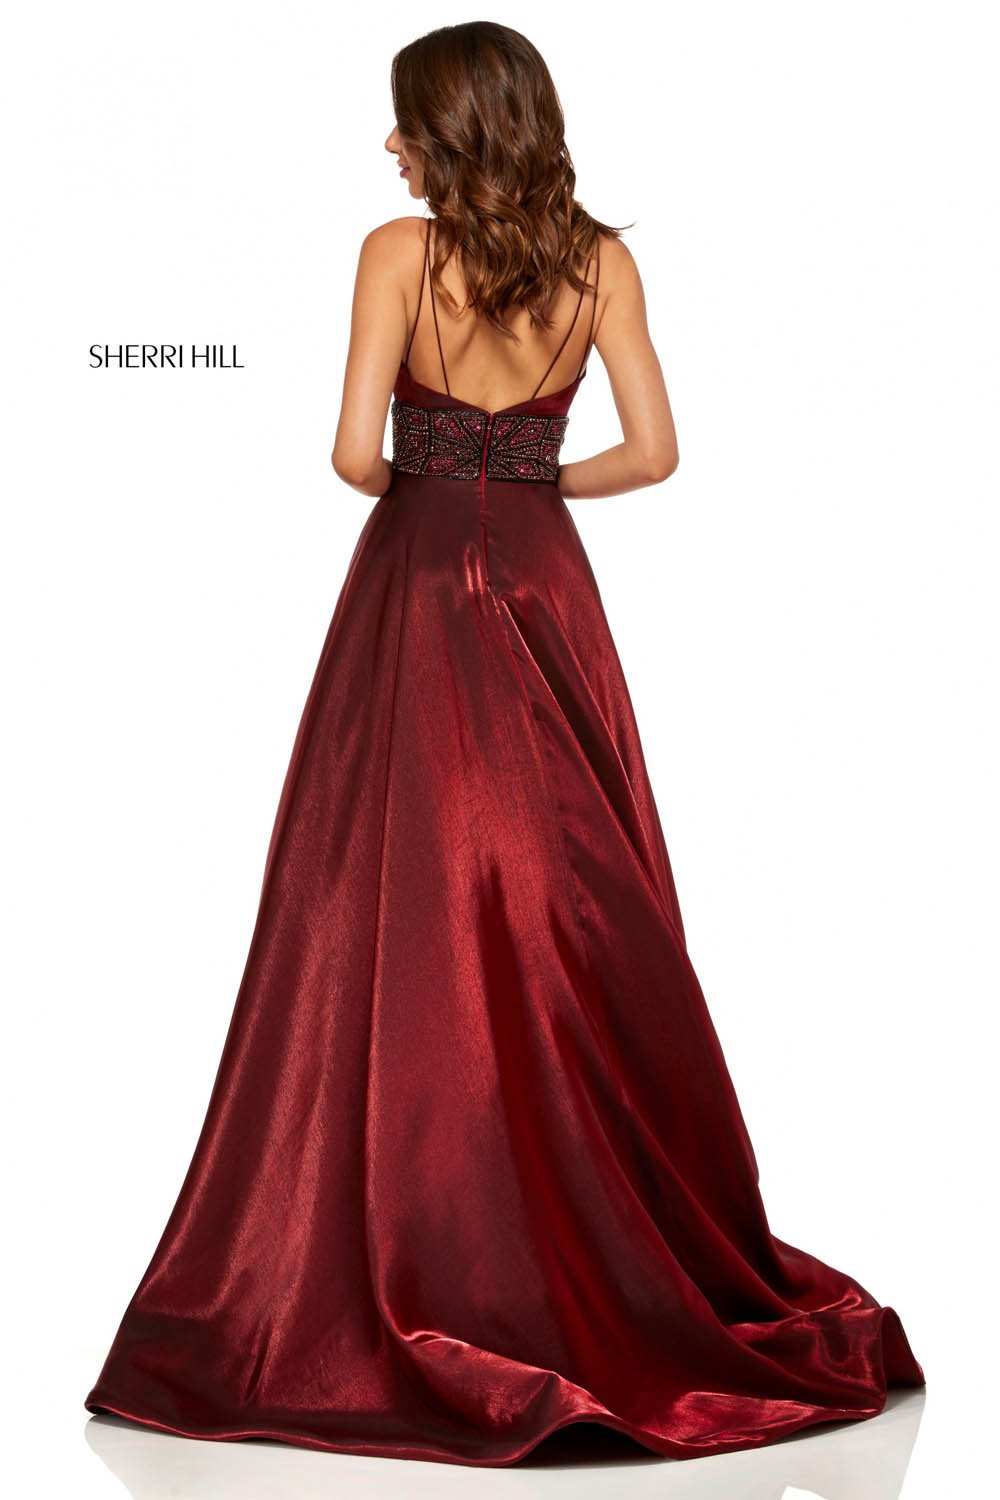 Sherri Hill 52423 dress images in these colors: Wine, Navy, Gunmetal, Emerald.